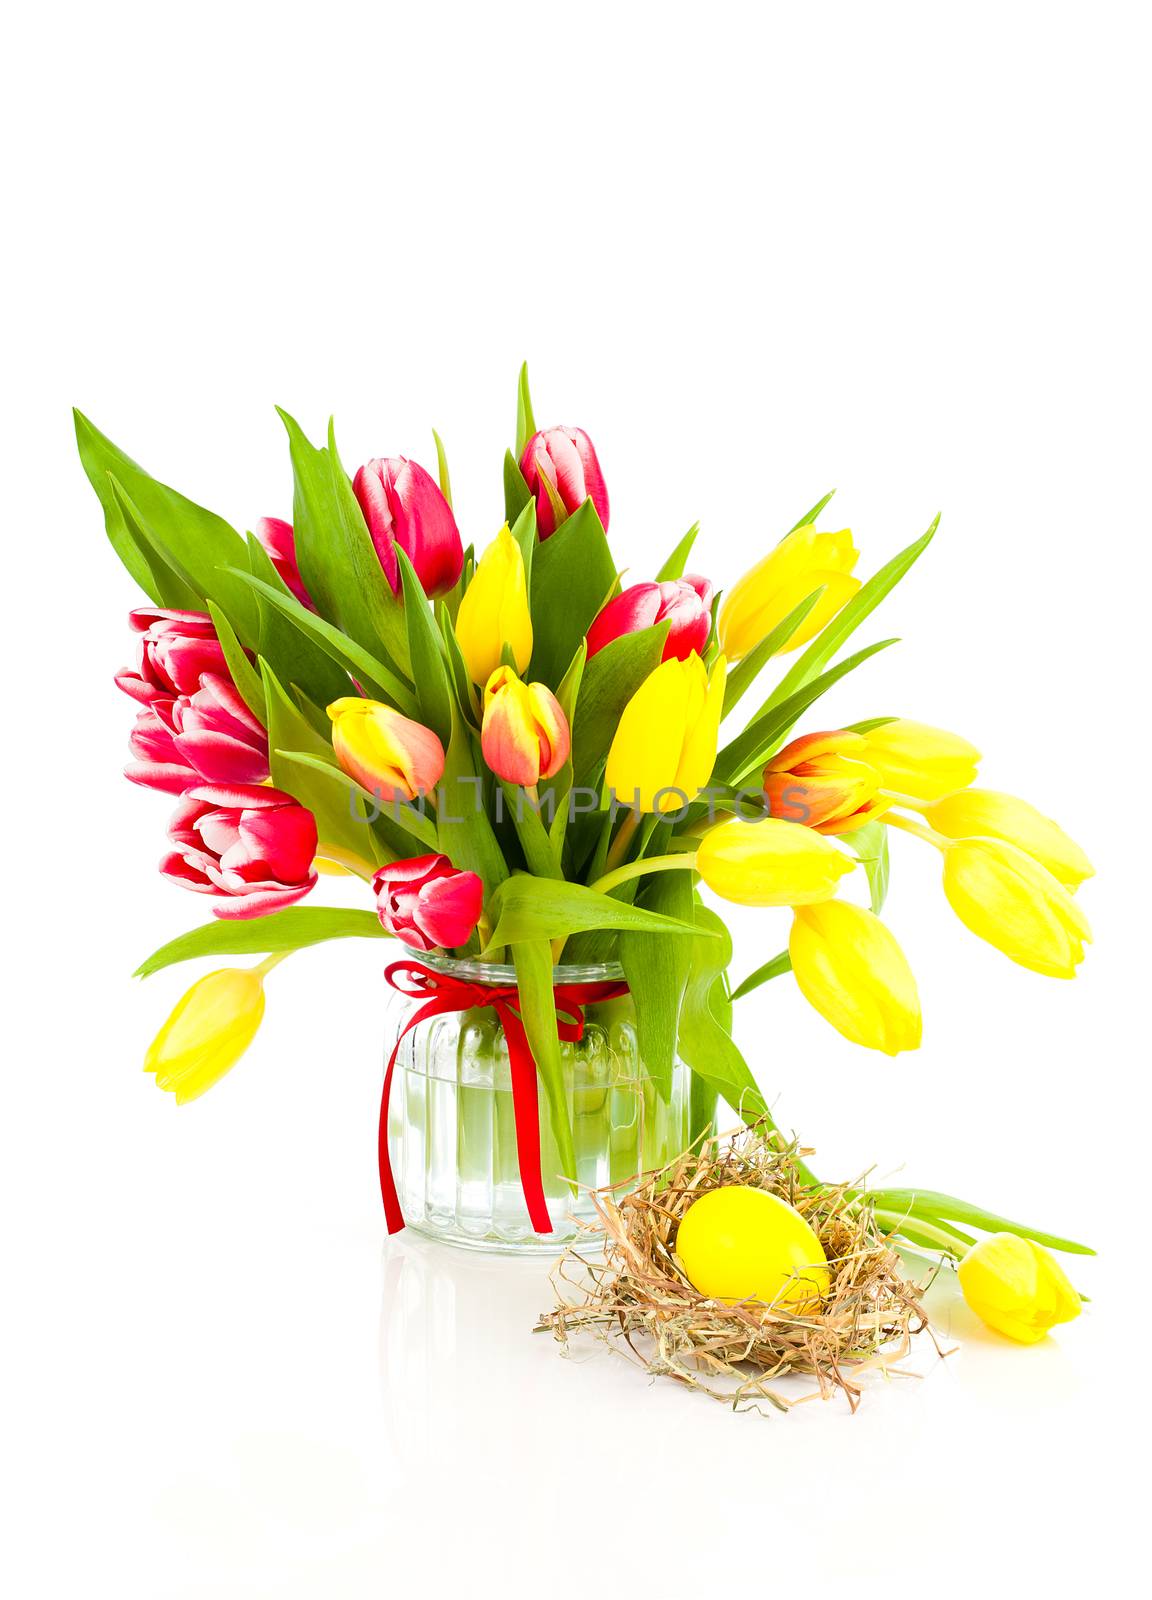 spring tulips with easter eggs on white background by motorolka